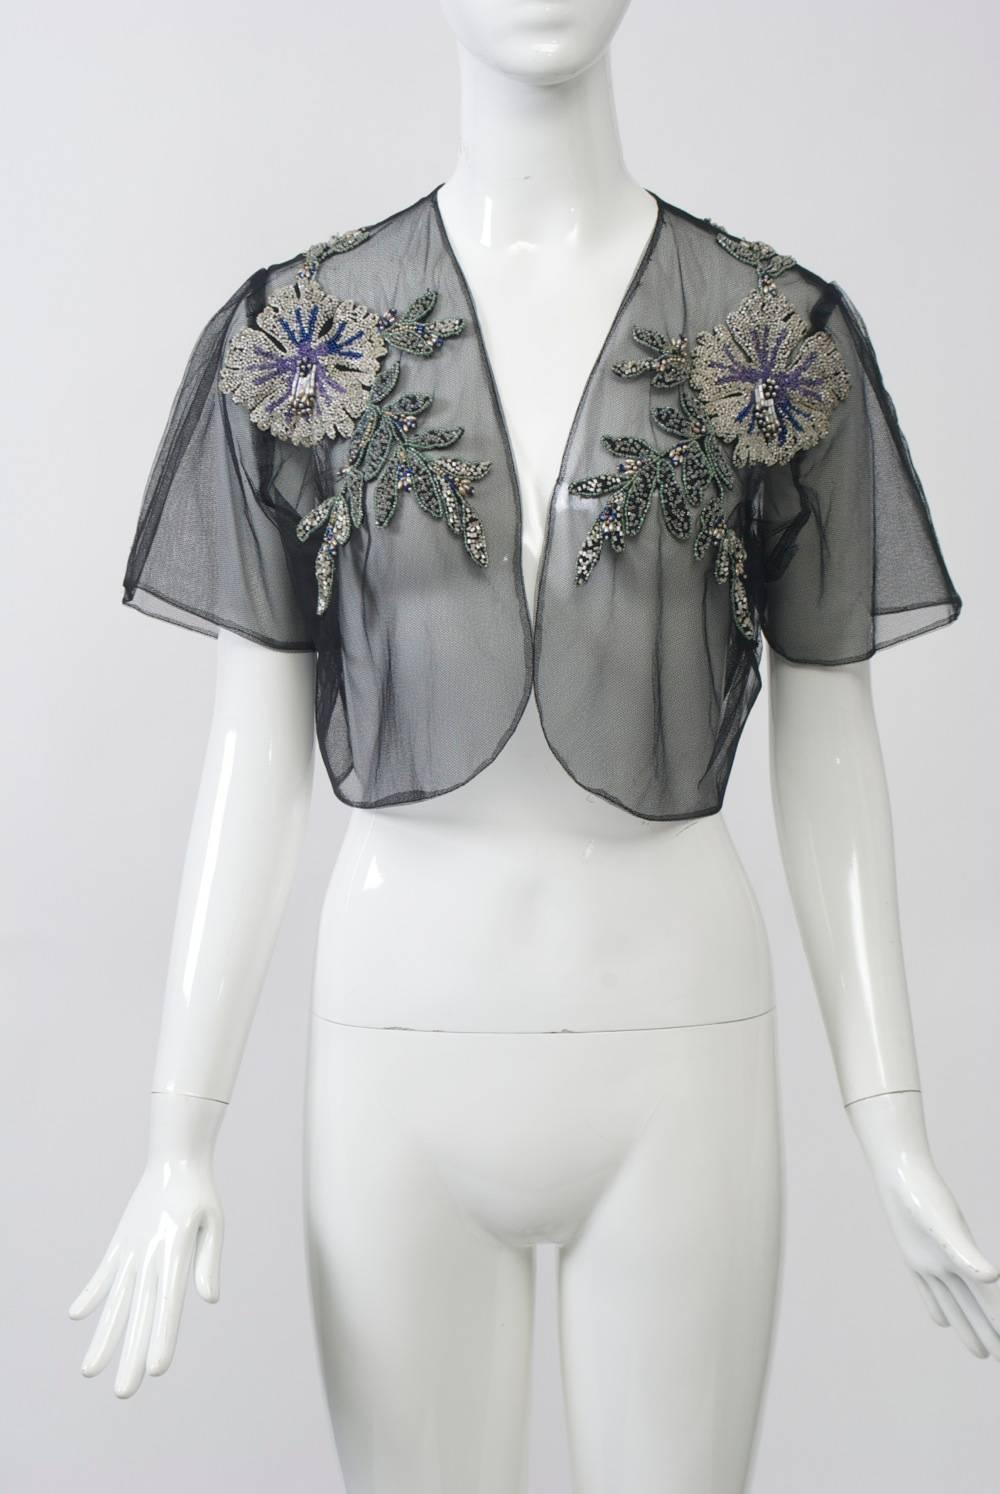 Black net bolero embellished with large beaded floral bursts and leaves. Collarless with short sleeves. Approximate size 8.